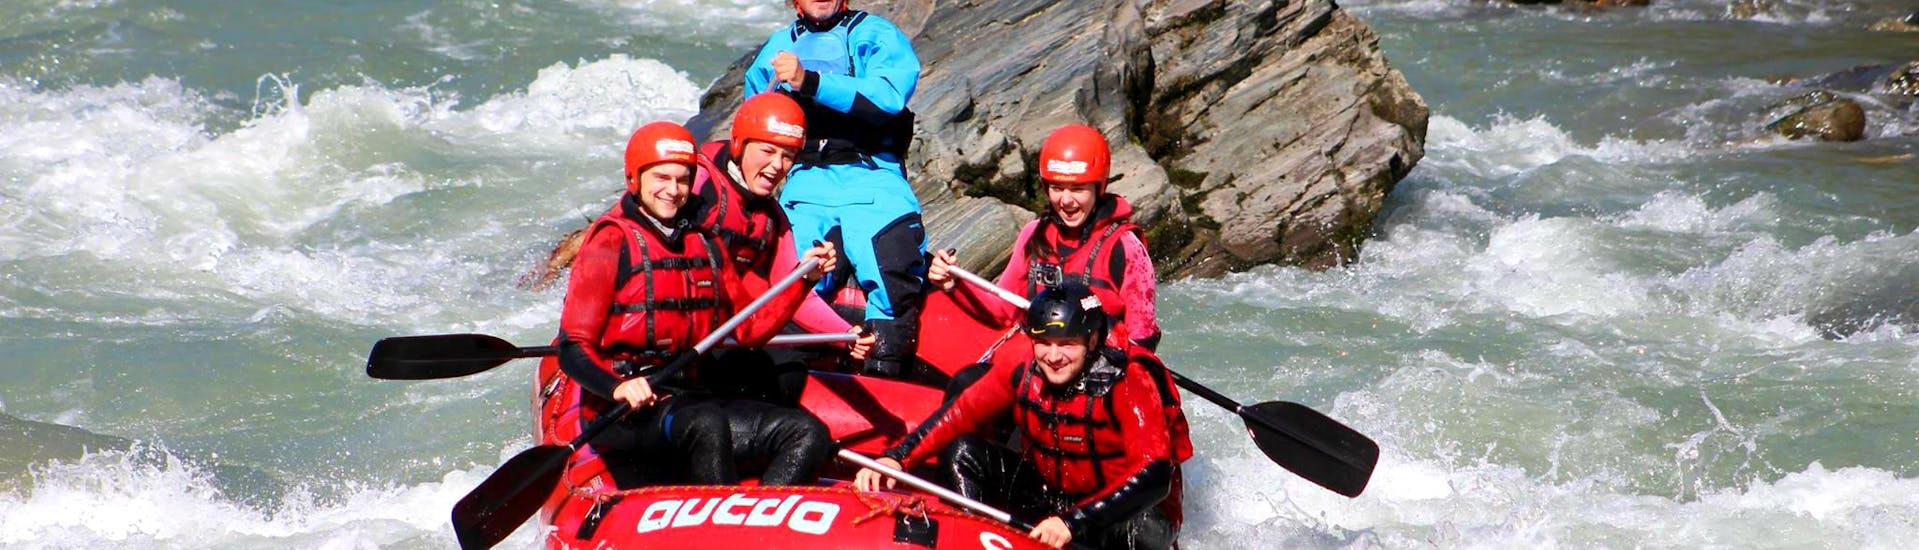 A rafting group conquering the waves and rapids of Salzach river on their Rafting Tour "Wild Water" together with an experienced guide from Outdo Zell am See Rating & Canyoning.